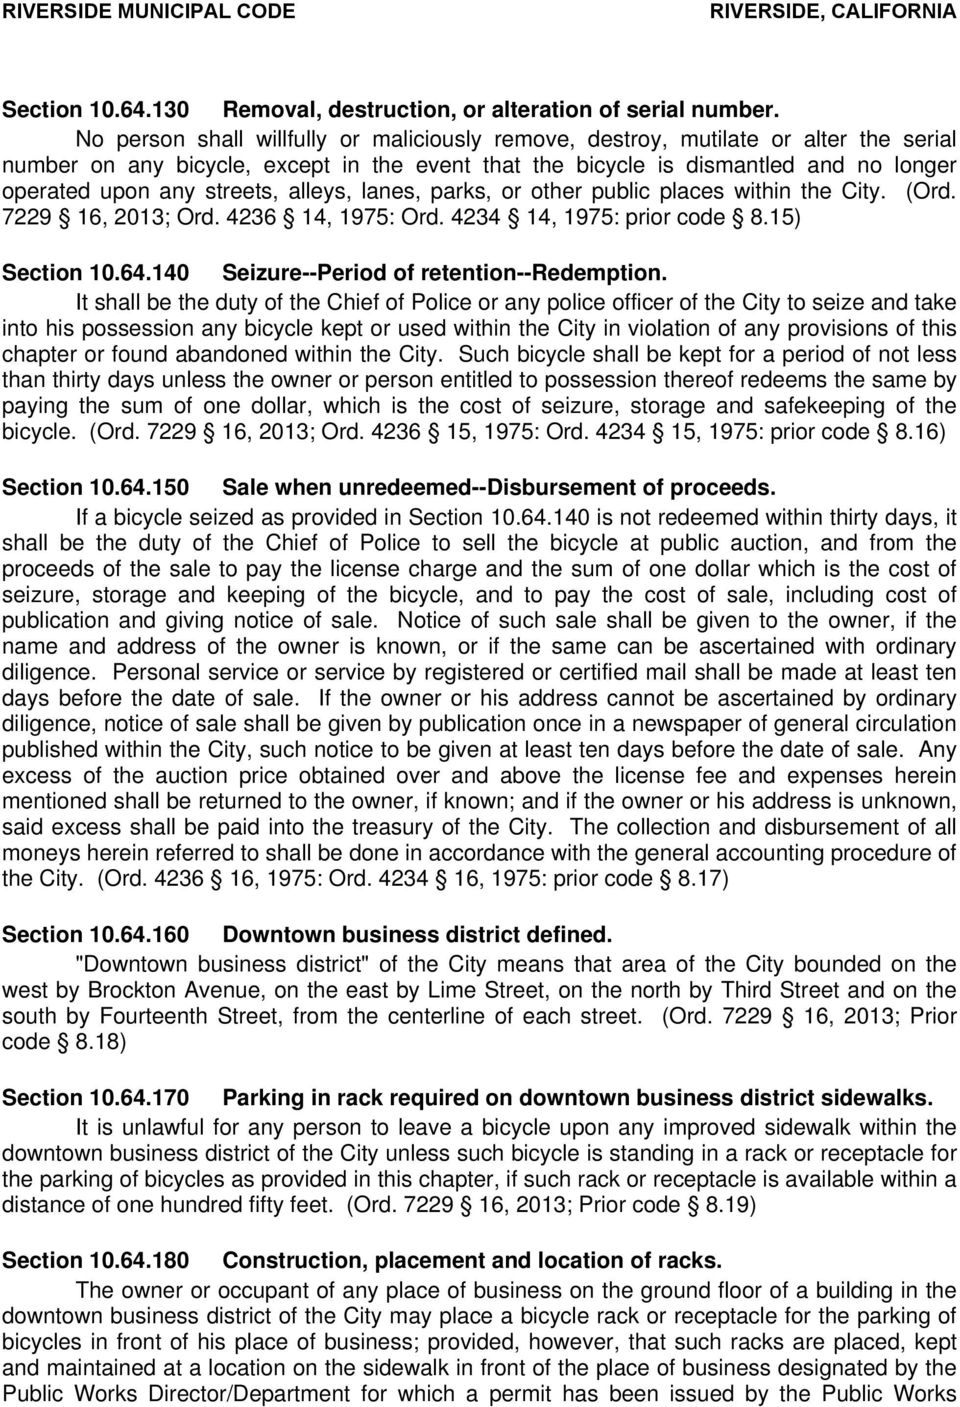 streets, alleys, lanes, parks, or other public places within the City. (Ord. 7229 16, 2013; Ord. 4236 14, 1975: Ord. 4234 14, 1975: prior code 8.15) Section 10.64.